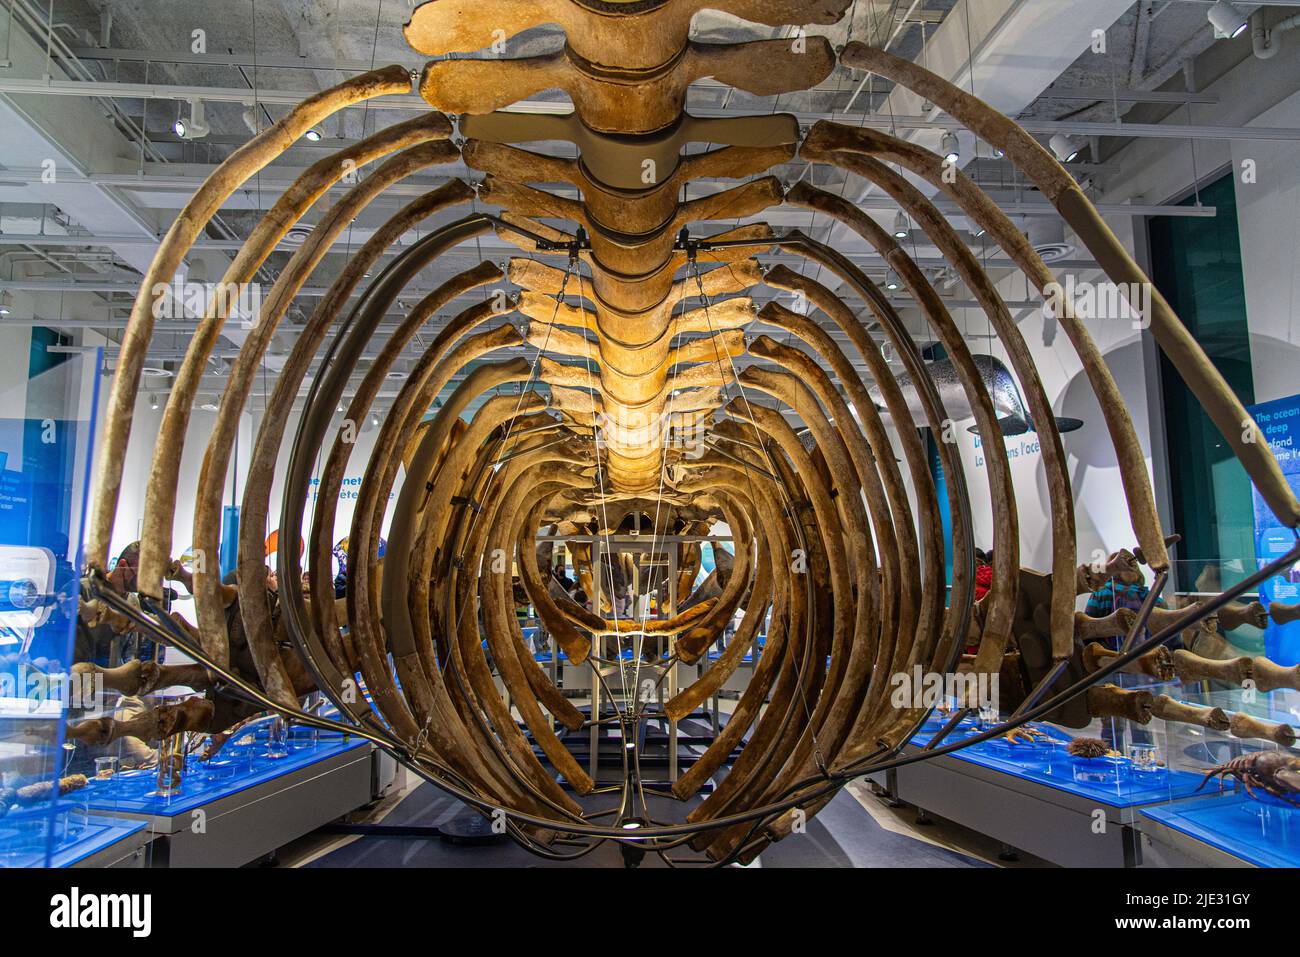 Ottawa, Canada - April 17 2022: The immense skeleton of Whale exhibited in Canadian nature museum Stock Photo